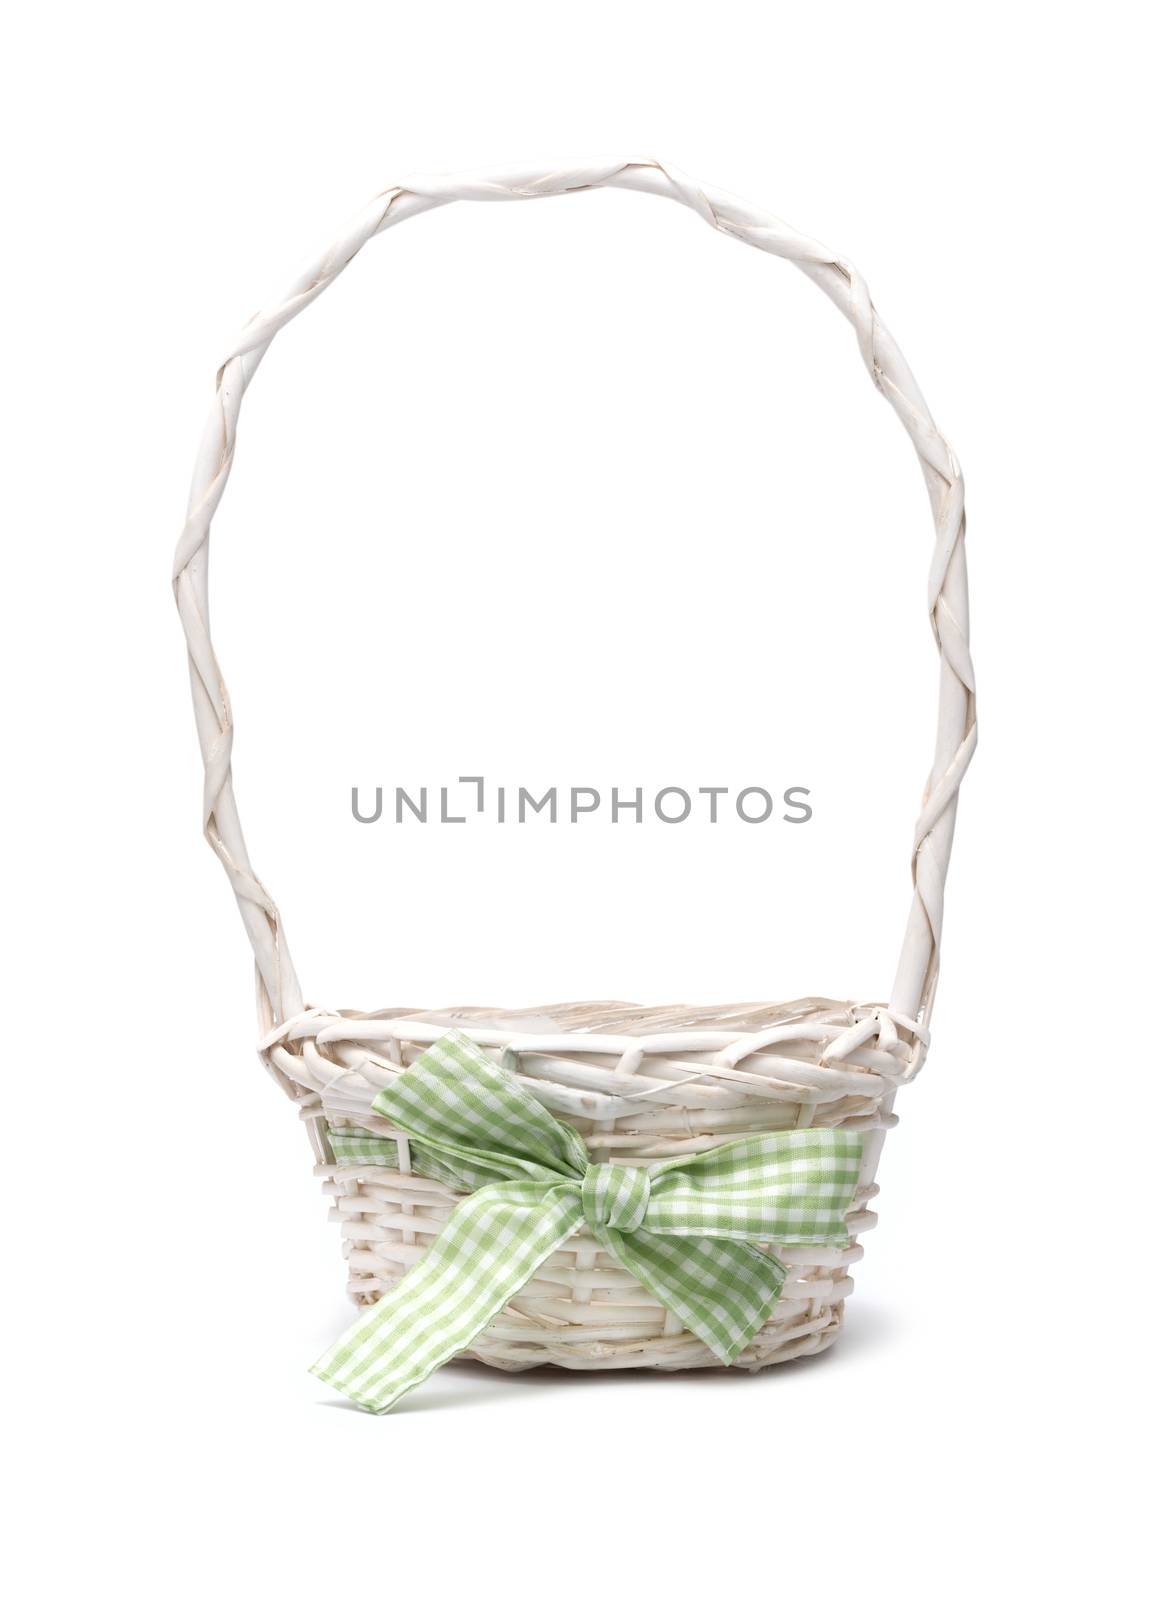 Woven basket on white background by DNKSTUDIO